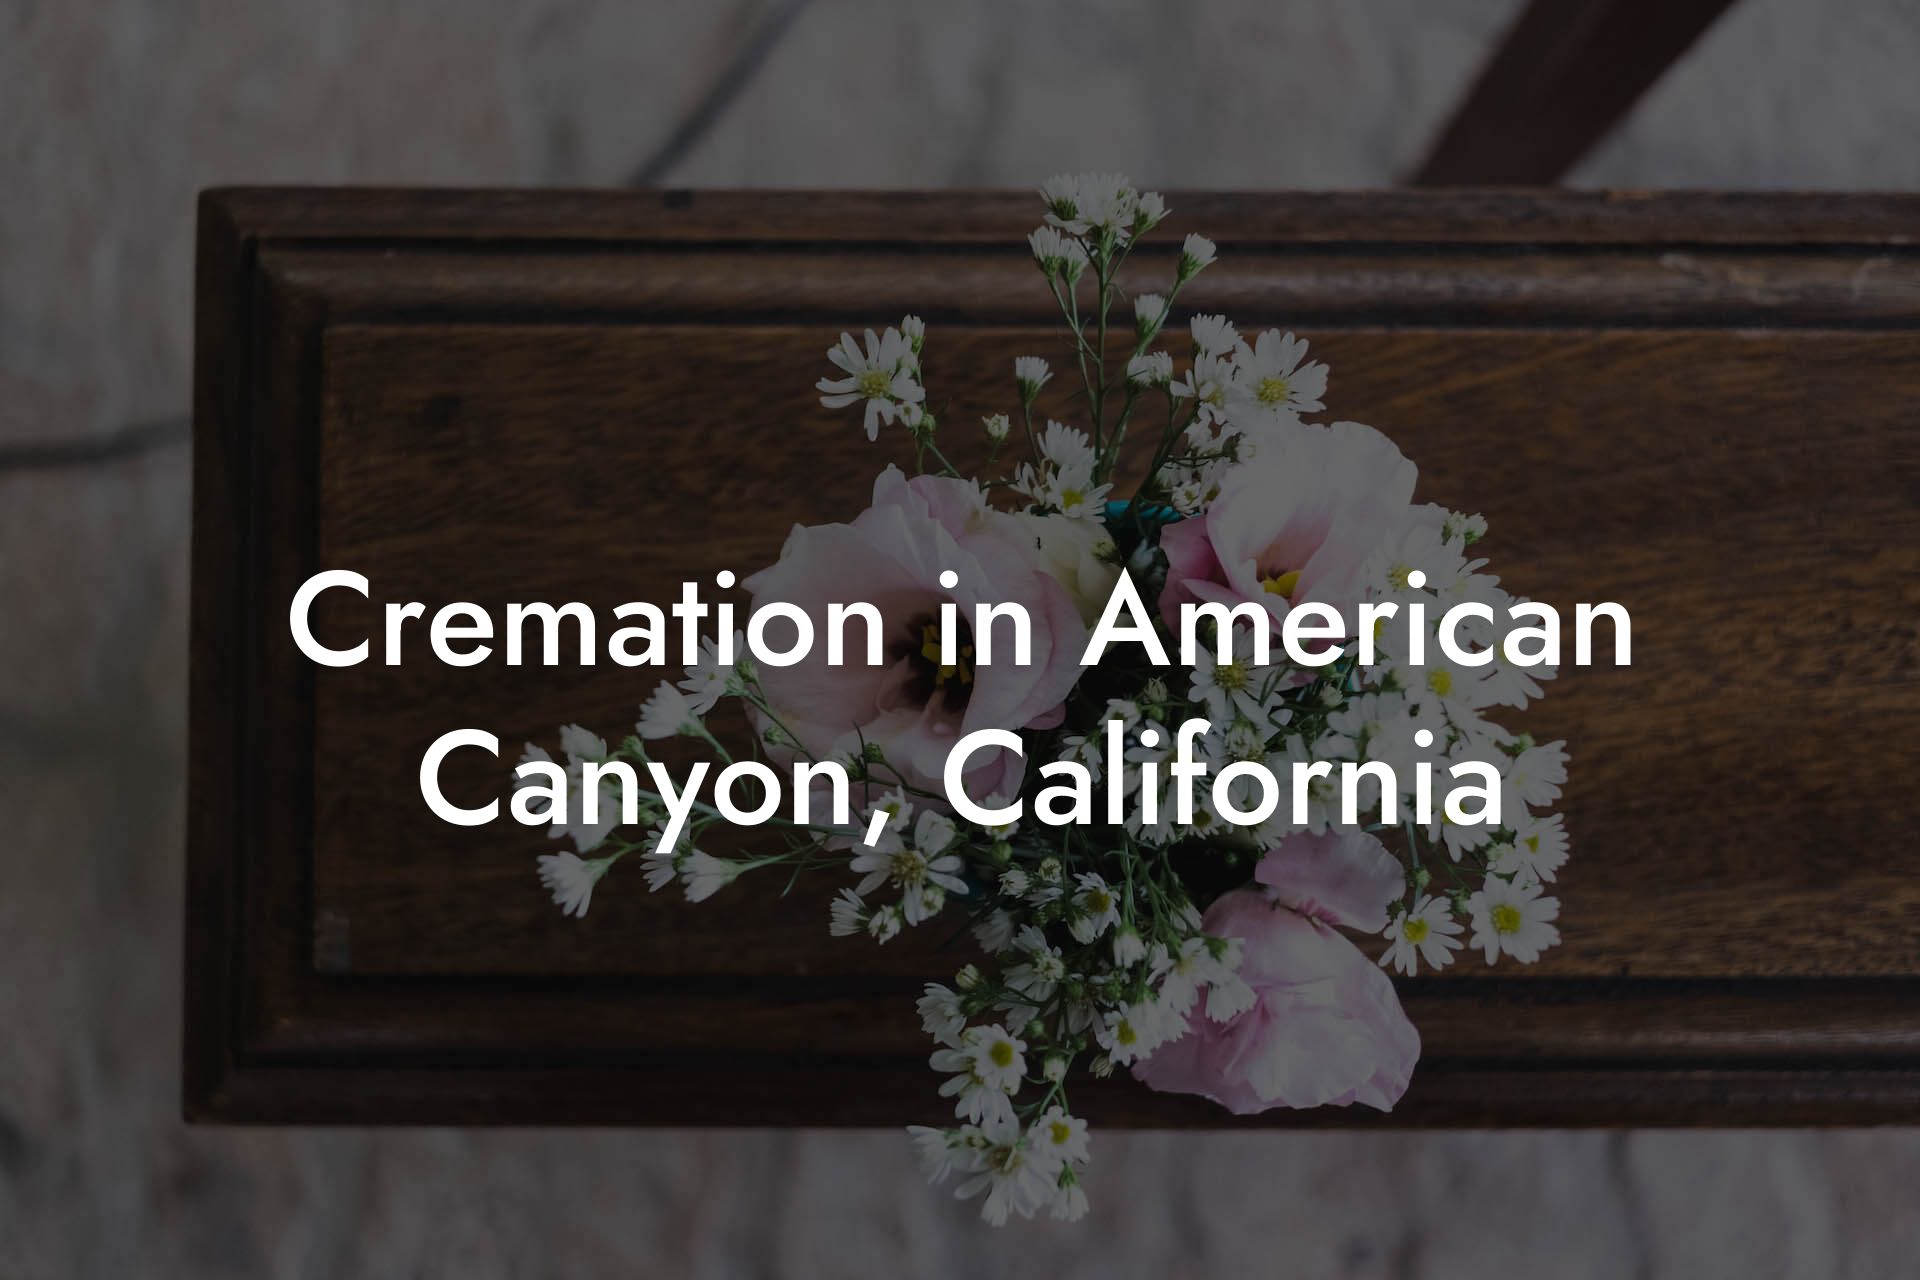 Cremation in American Canyon, California